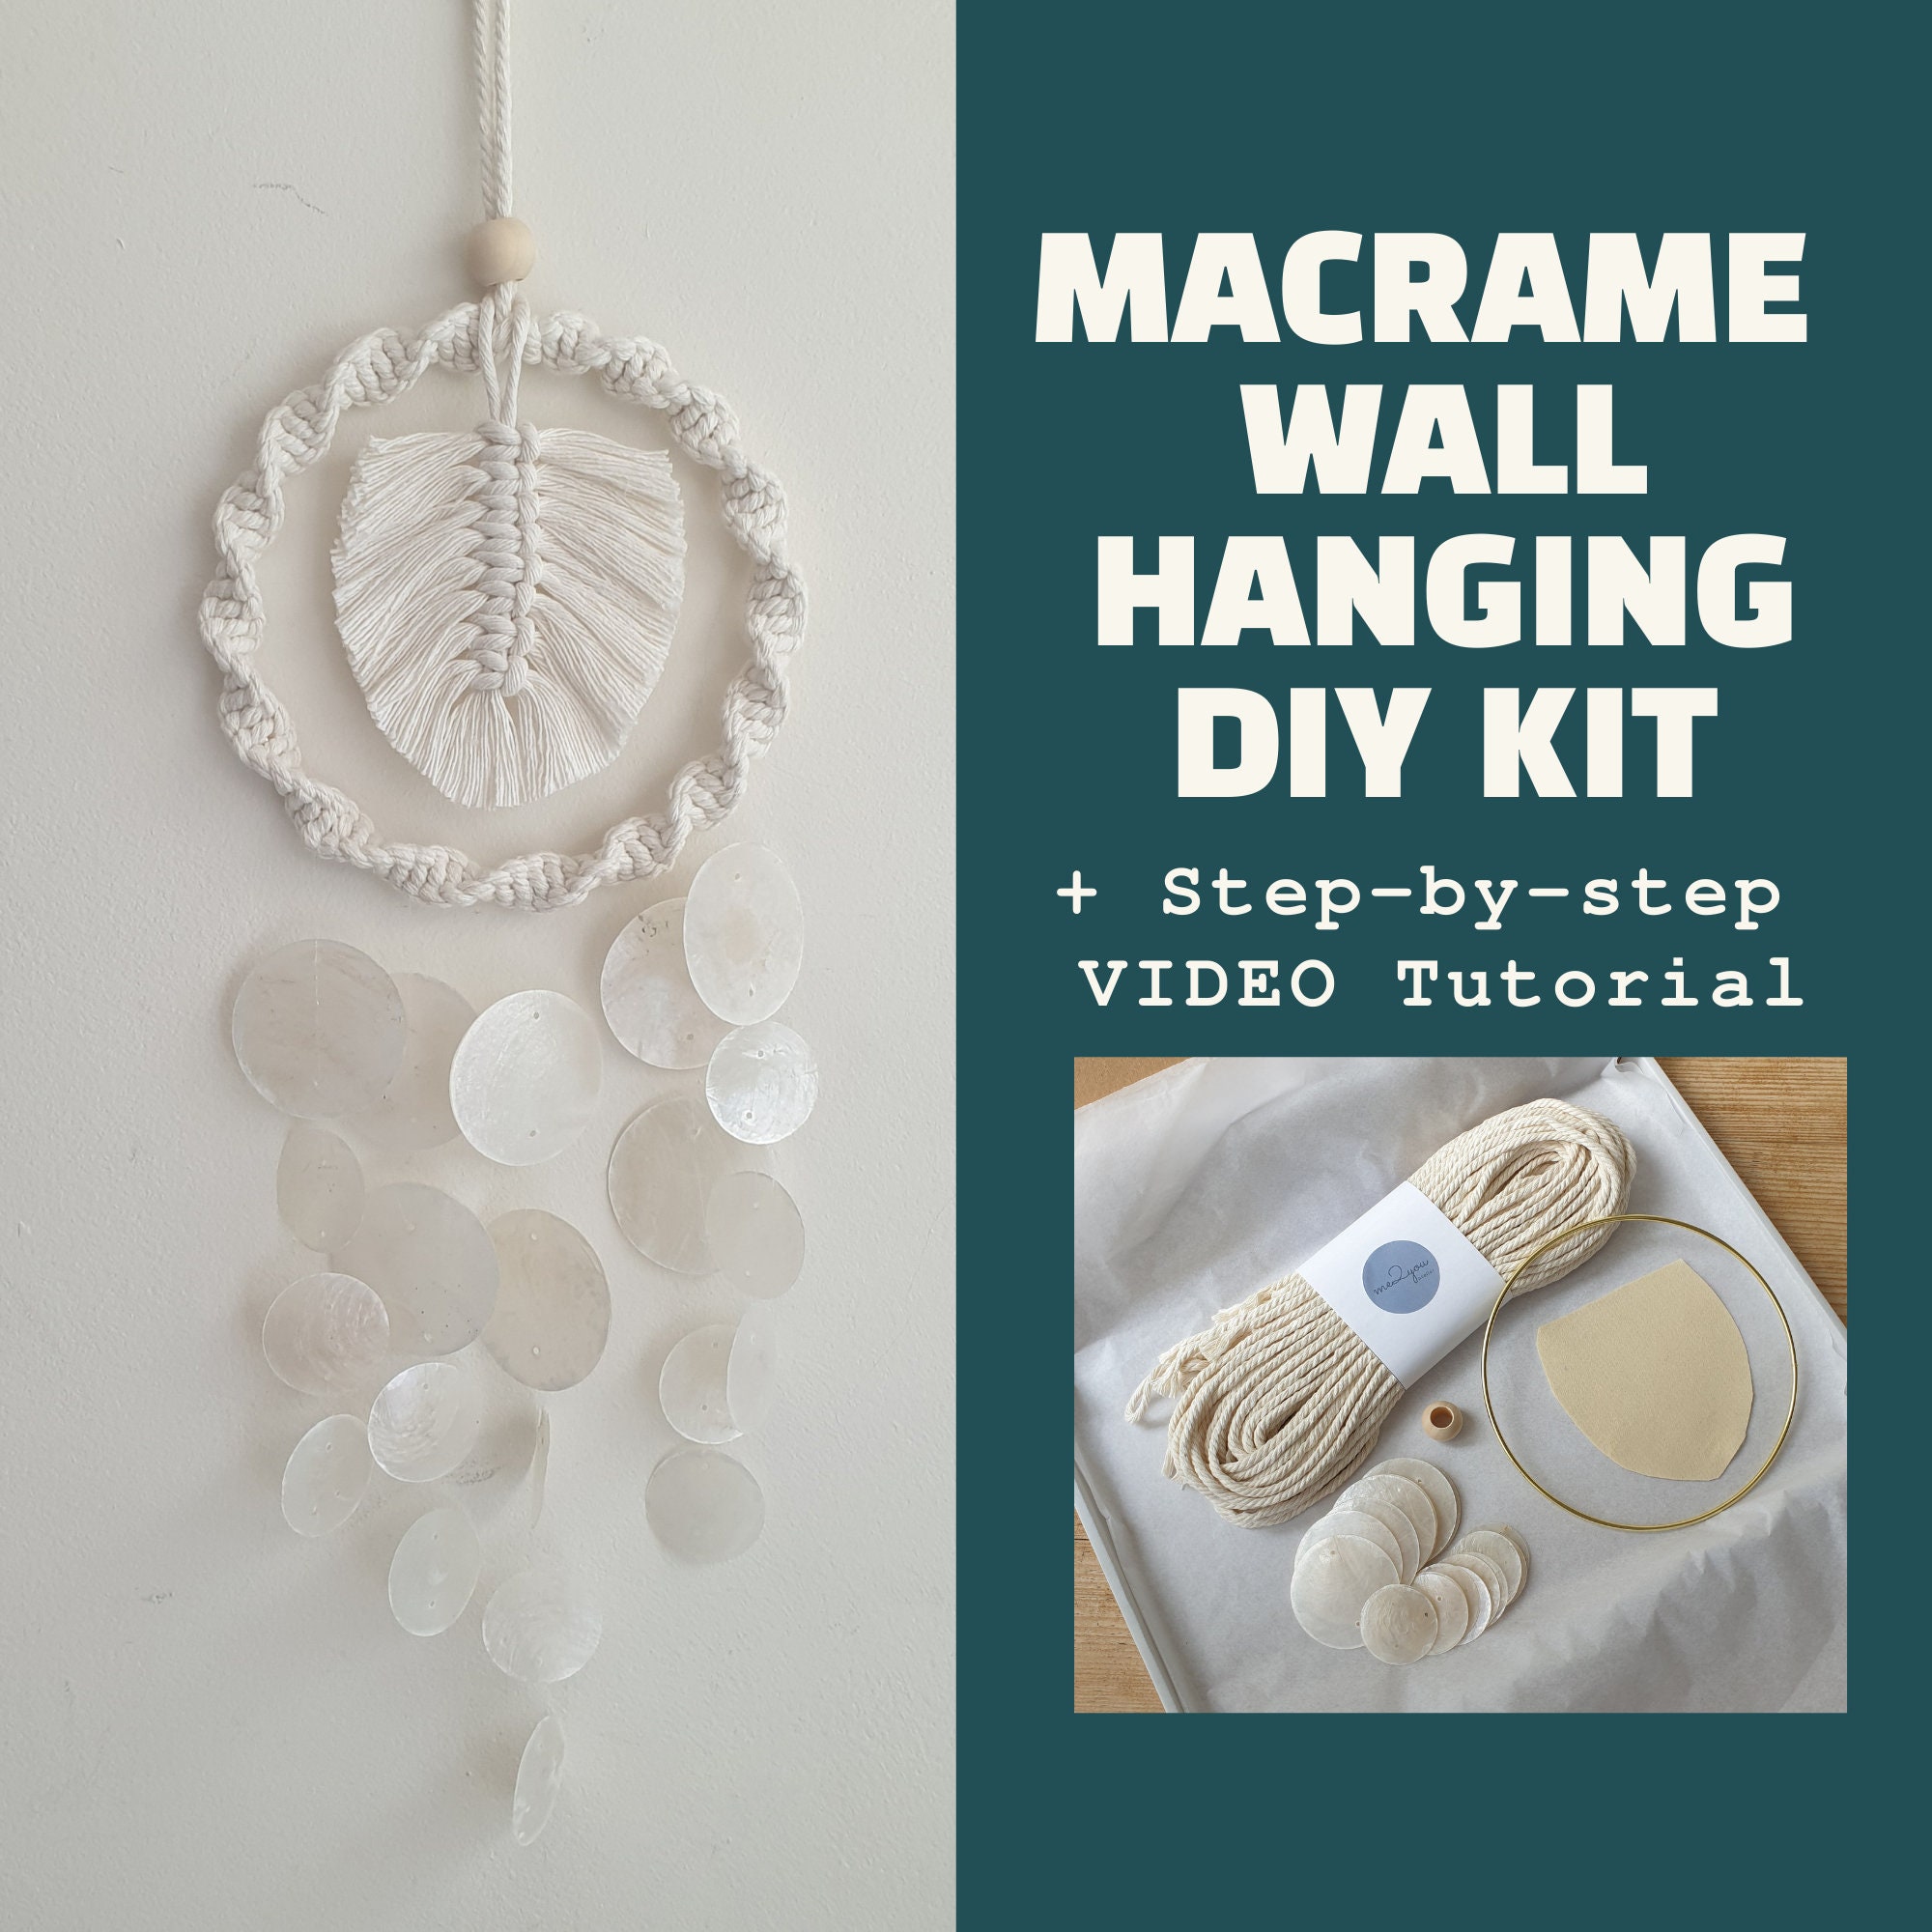 3 in 1 Macrame kit Adult Beginner: 3 DIY Christmas Macrame Tree, Crafts for  Adults, Macrame Cord 3mm, Boho Christmas Decor, Macrame Kits for Adults  with Written Instructions and Video Tutorials